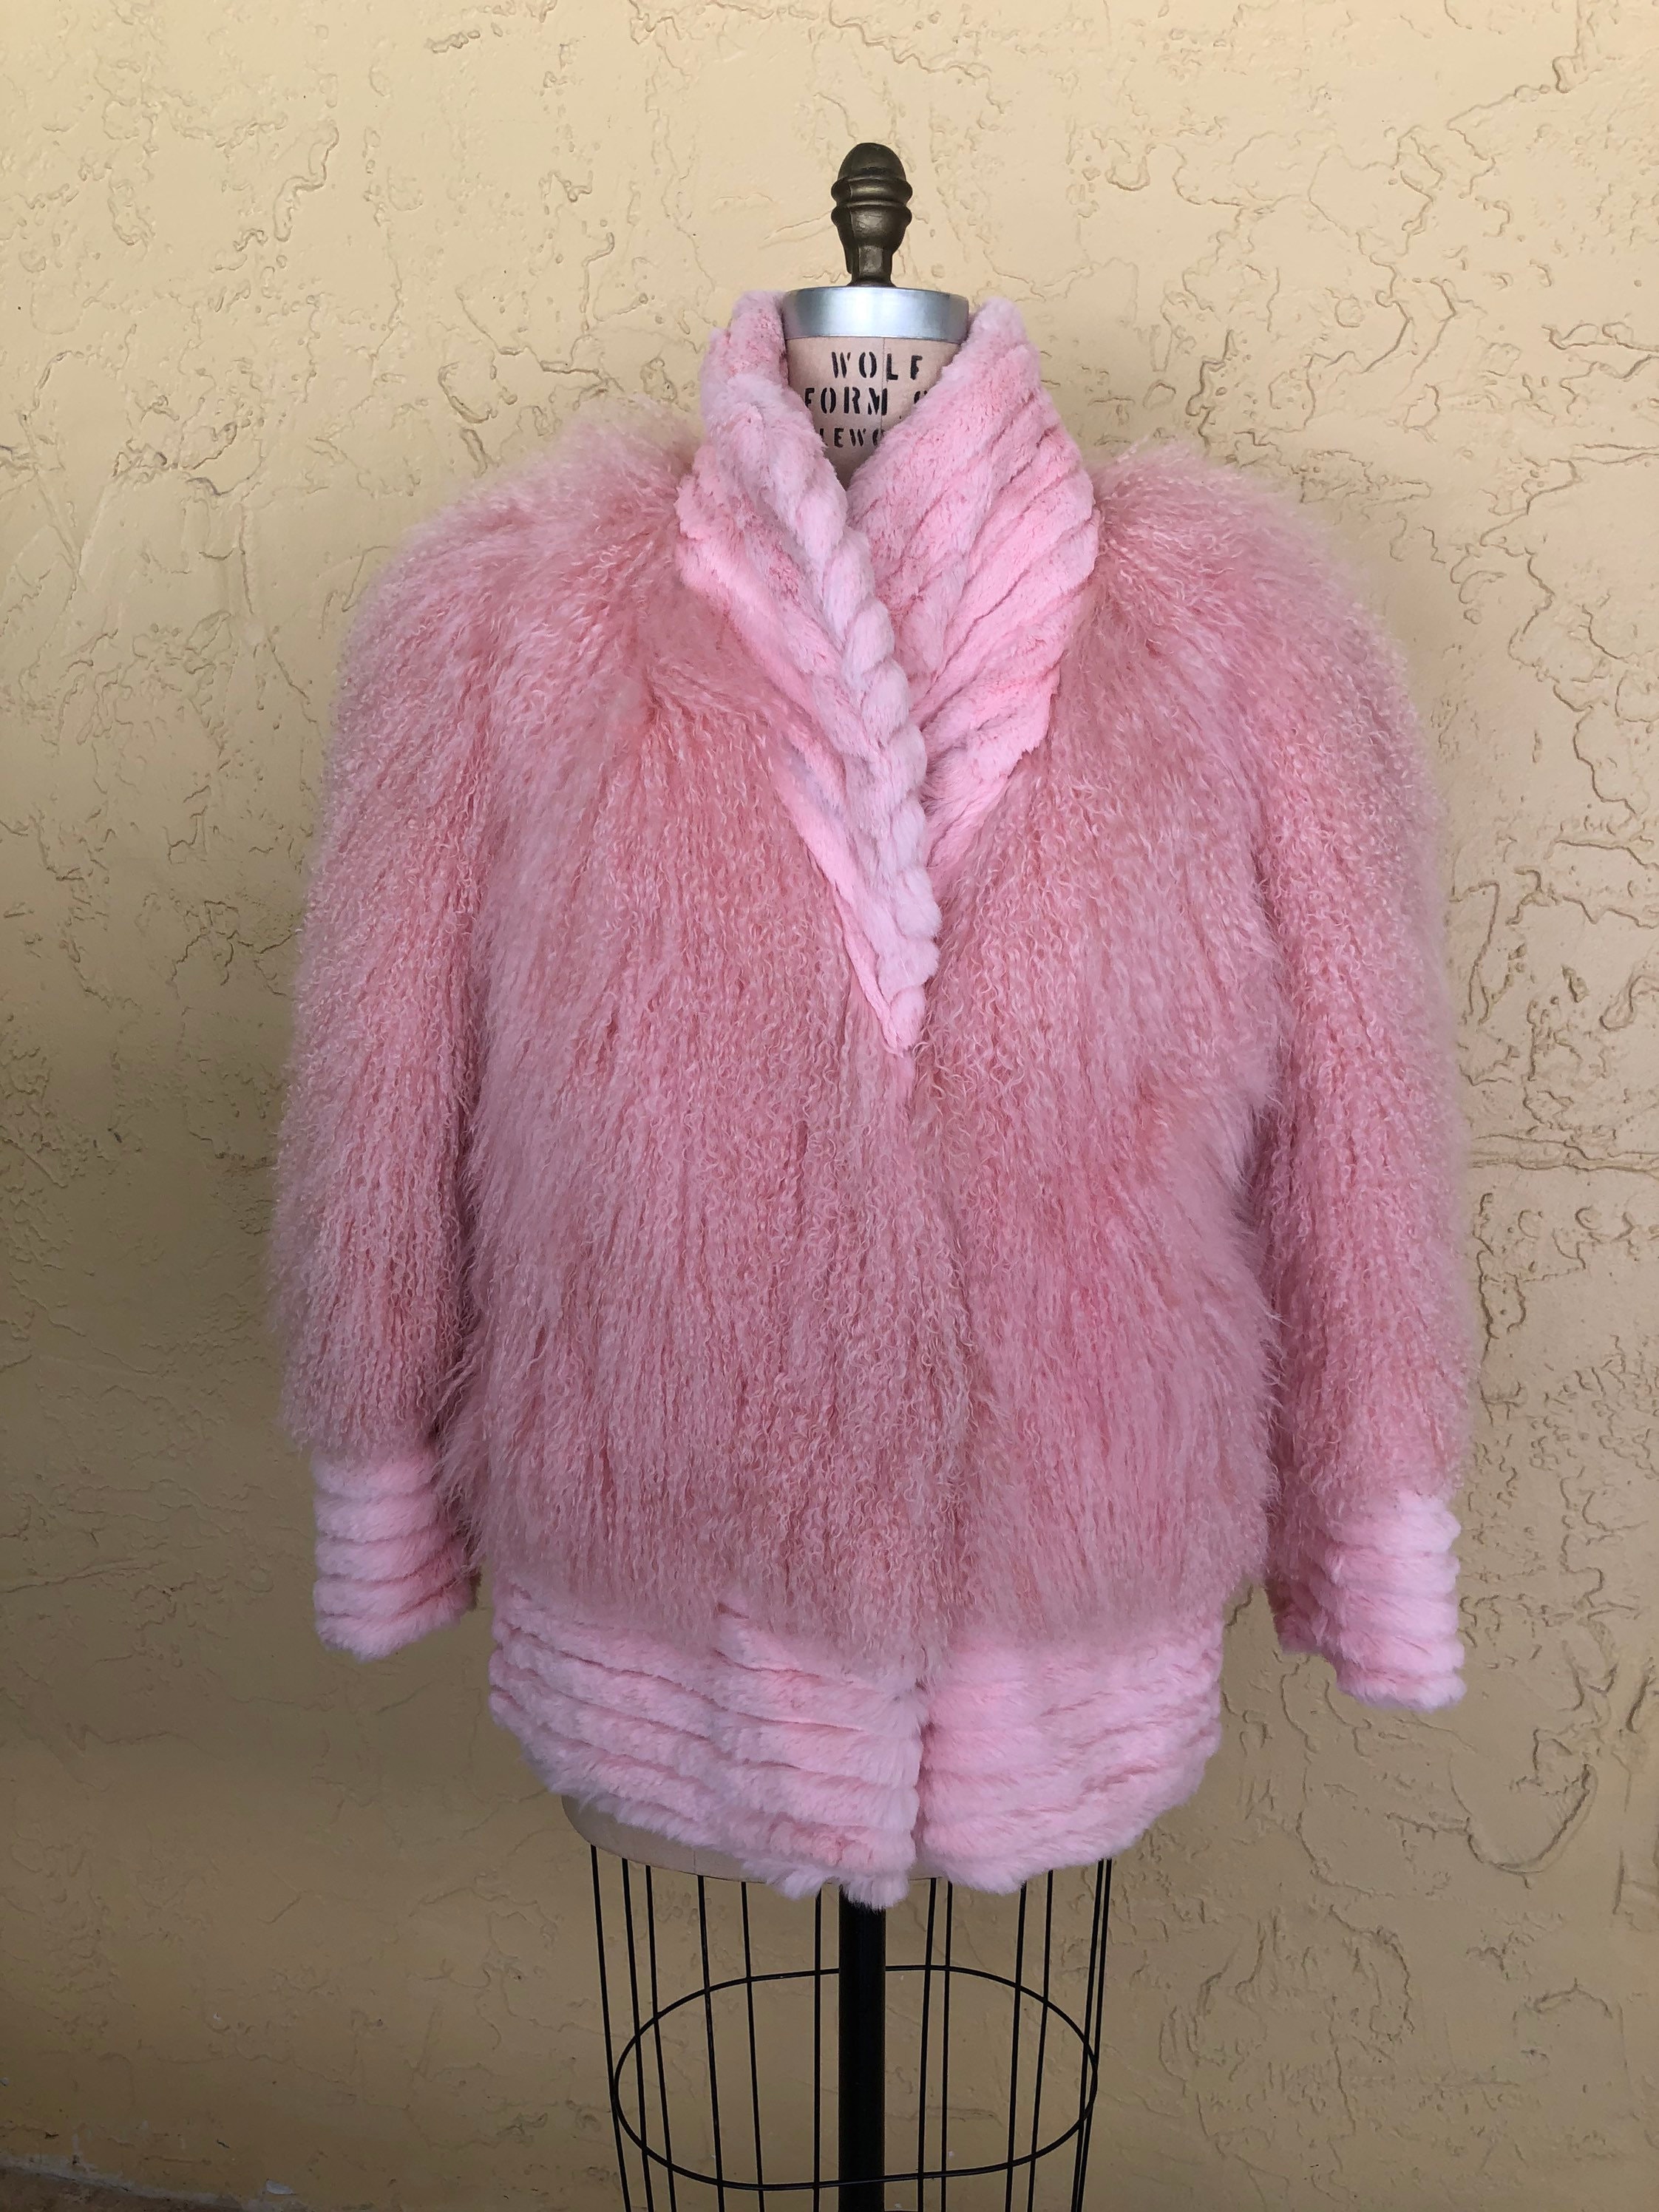 Get Party Ready in a Shaggy Jacket and Pink Booties